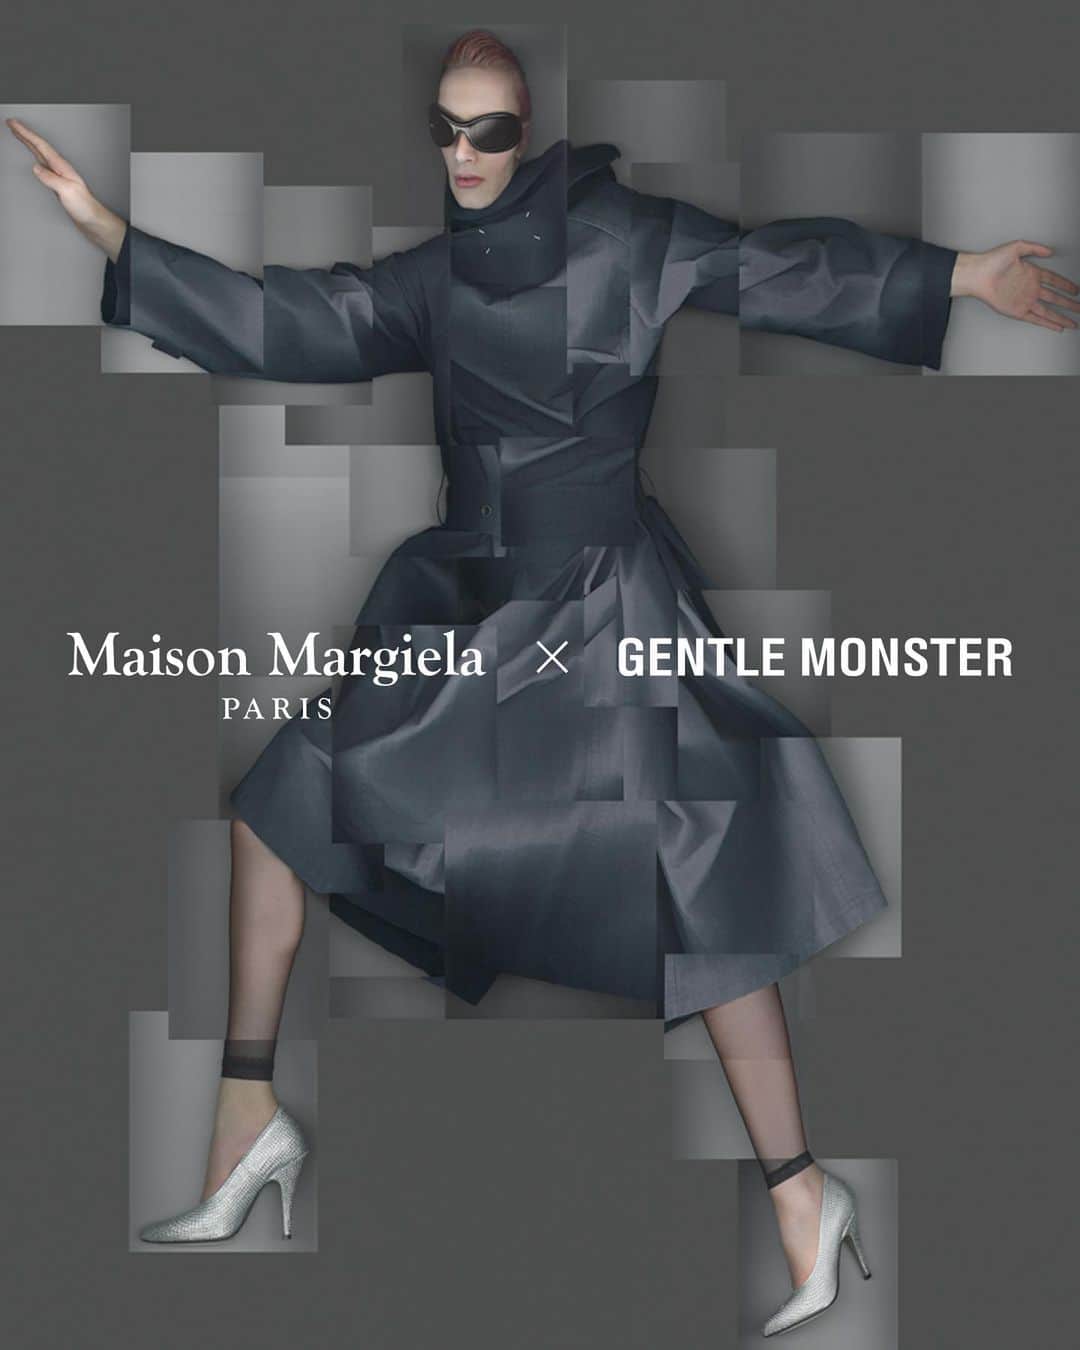 GENTLE MONSTERのインスタグラム：「Maison Margiela × Gentle Monster ⁣ ⁣ Explore the collaborative eyewear collection with Maison Margiela. The collection encapsulates both two identities, reflecting each brand’s iconic elements and the value of uncompromising creativity and self-expression.⁣ ⁣ Register for the early notification via link in bio to shop the Maison Margiela × Gentle Monster eyewear collection of the⁣ global launch on February 28th.⁣⁣ ⁣ #MaisonMargielaxGentleMonster⁣ #GentleMonster」